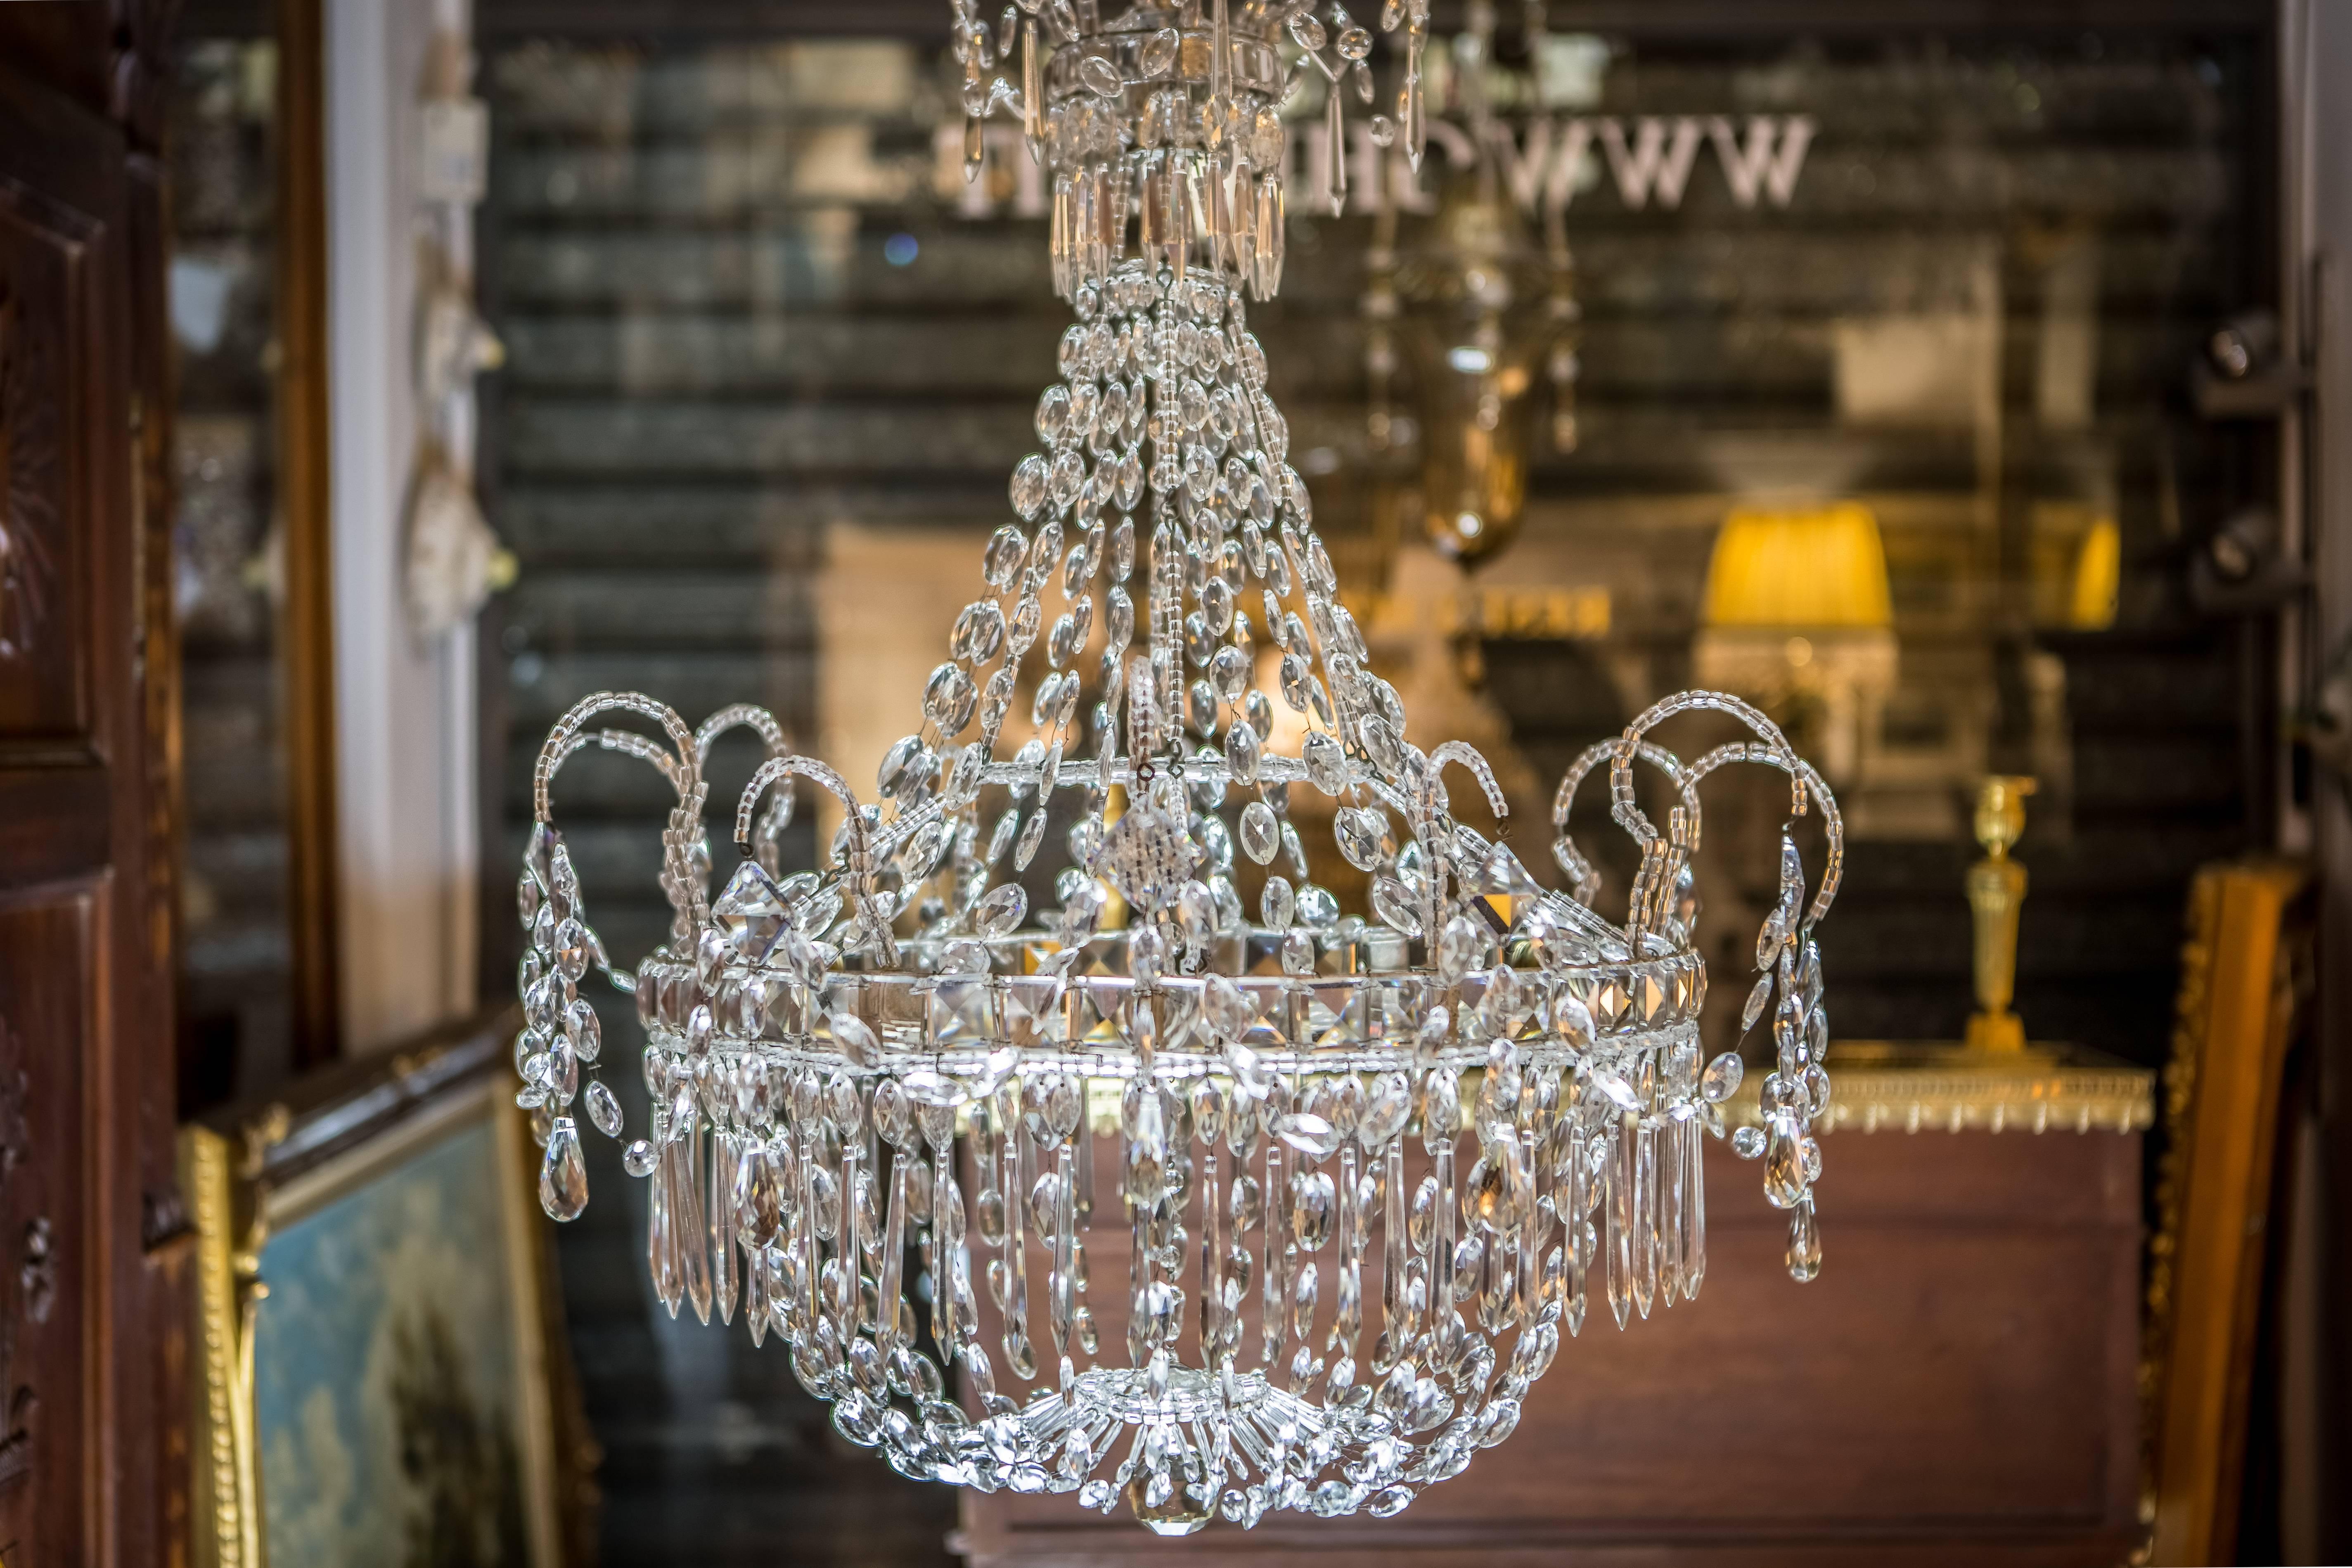 Empire beaded crystal six-light chandelier, Italian origin, circa 1860, excellent and original condition.
Circular drop shaped, timeless charme of Bohemian crystal drop shaped structure, finely decorated by hook curved beaded crystal arms on the